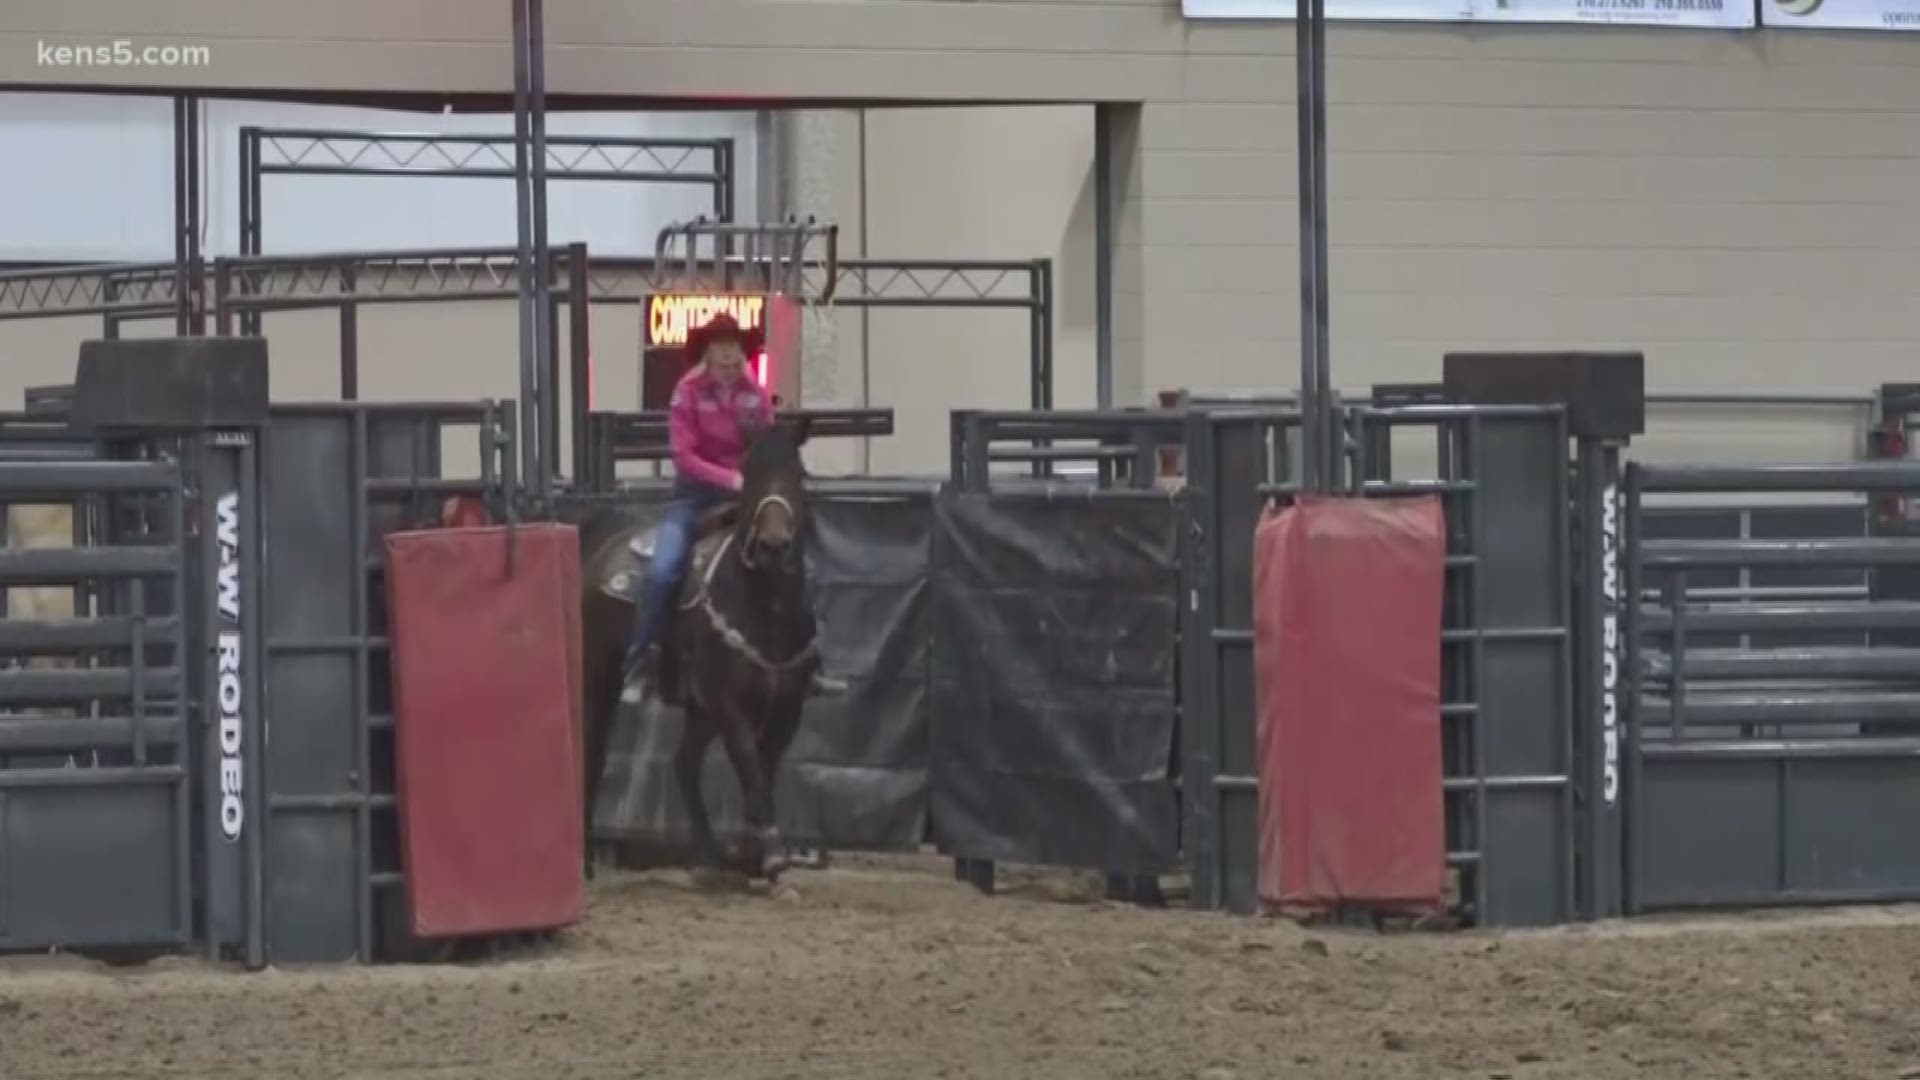 The San Antonio Rodeo is one of the most competitive in the country, particularly when it comes to barrel racing. For one competitor, barrel racing is a family affair.